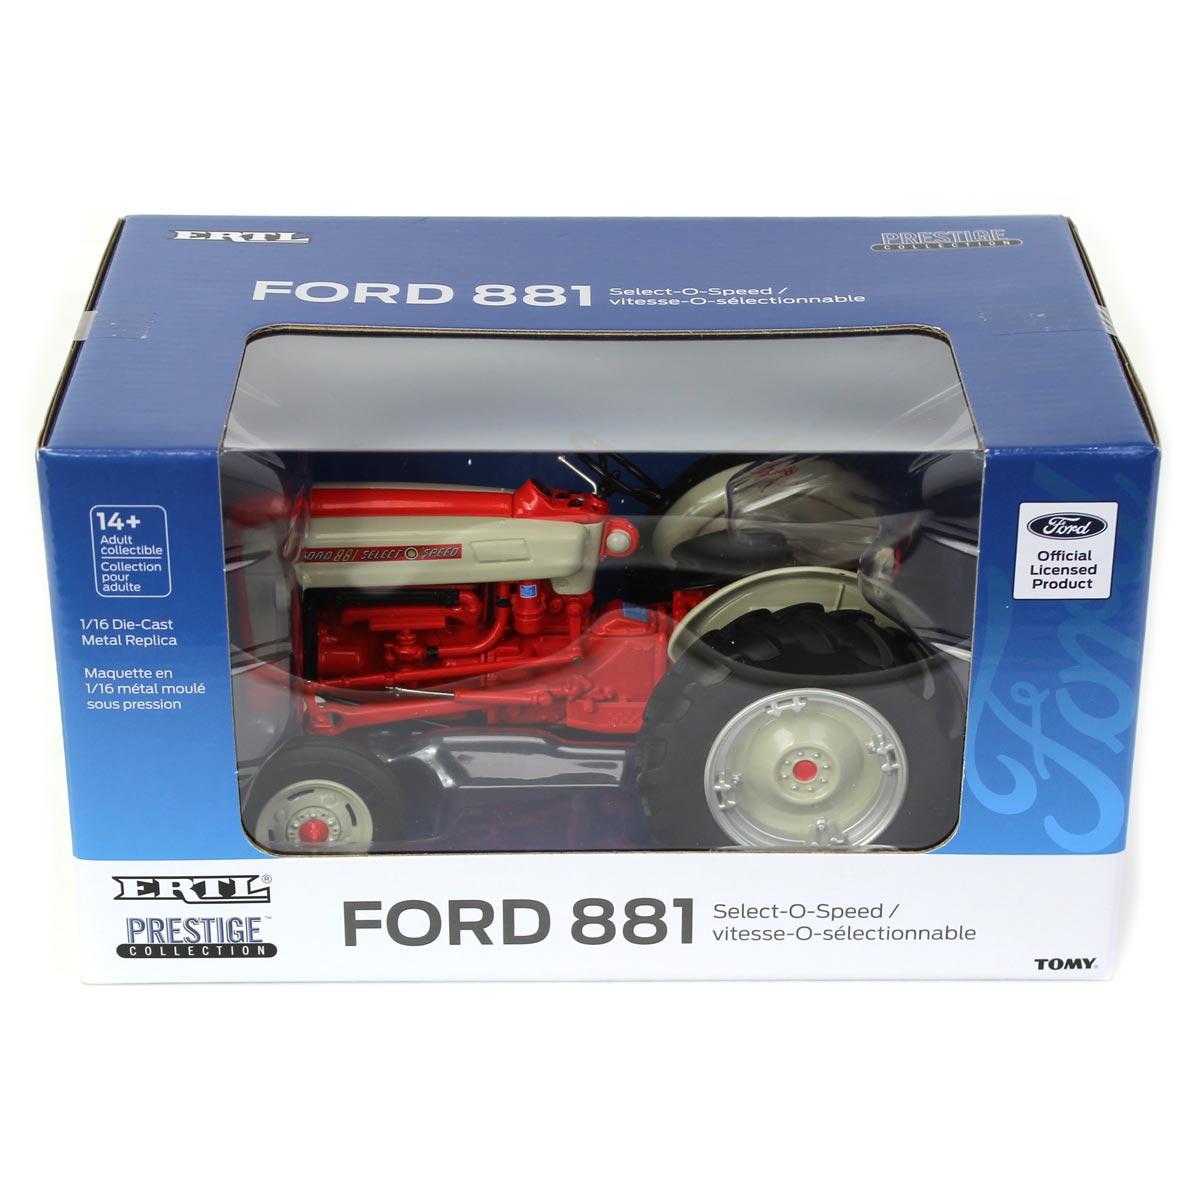 Ford 881 Select-O-Speed Wide Front Prestige Collection